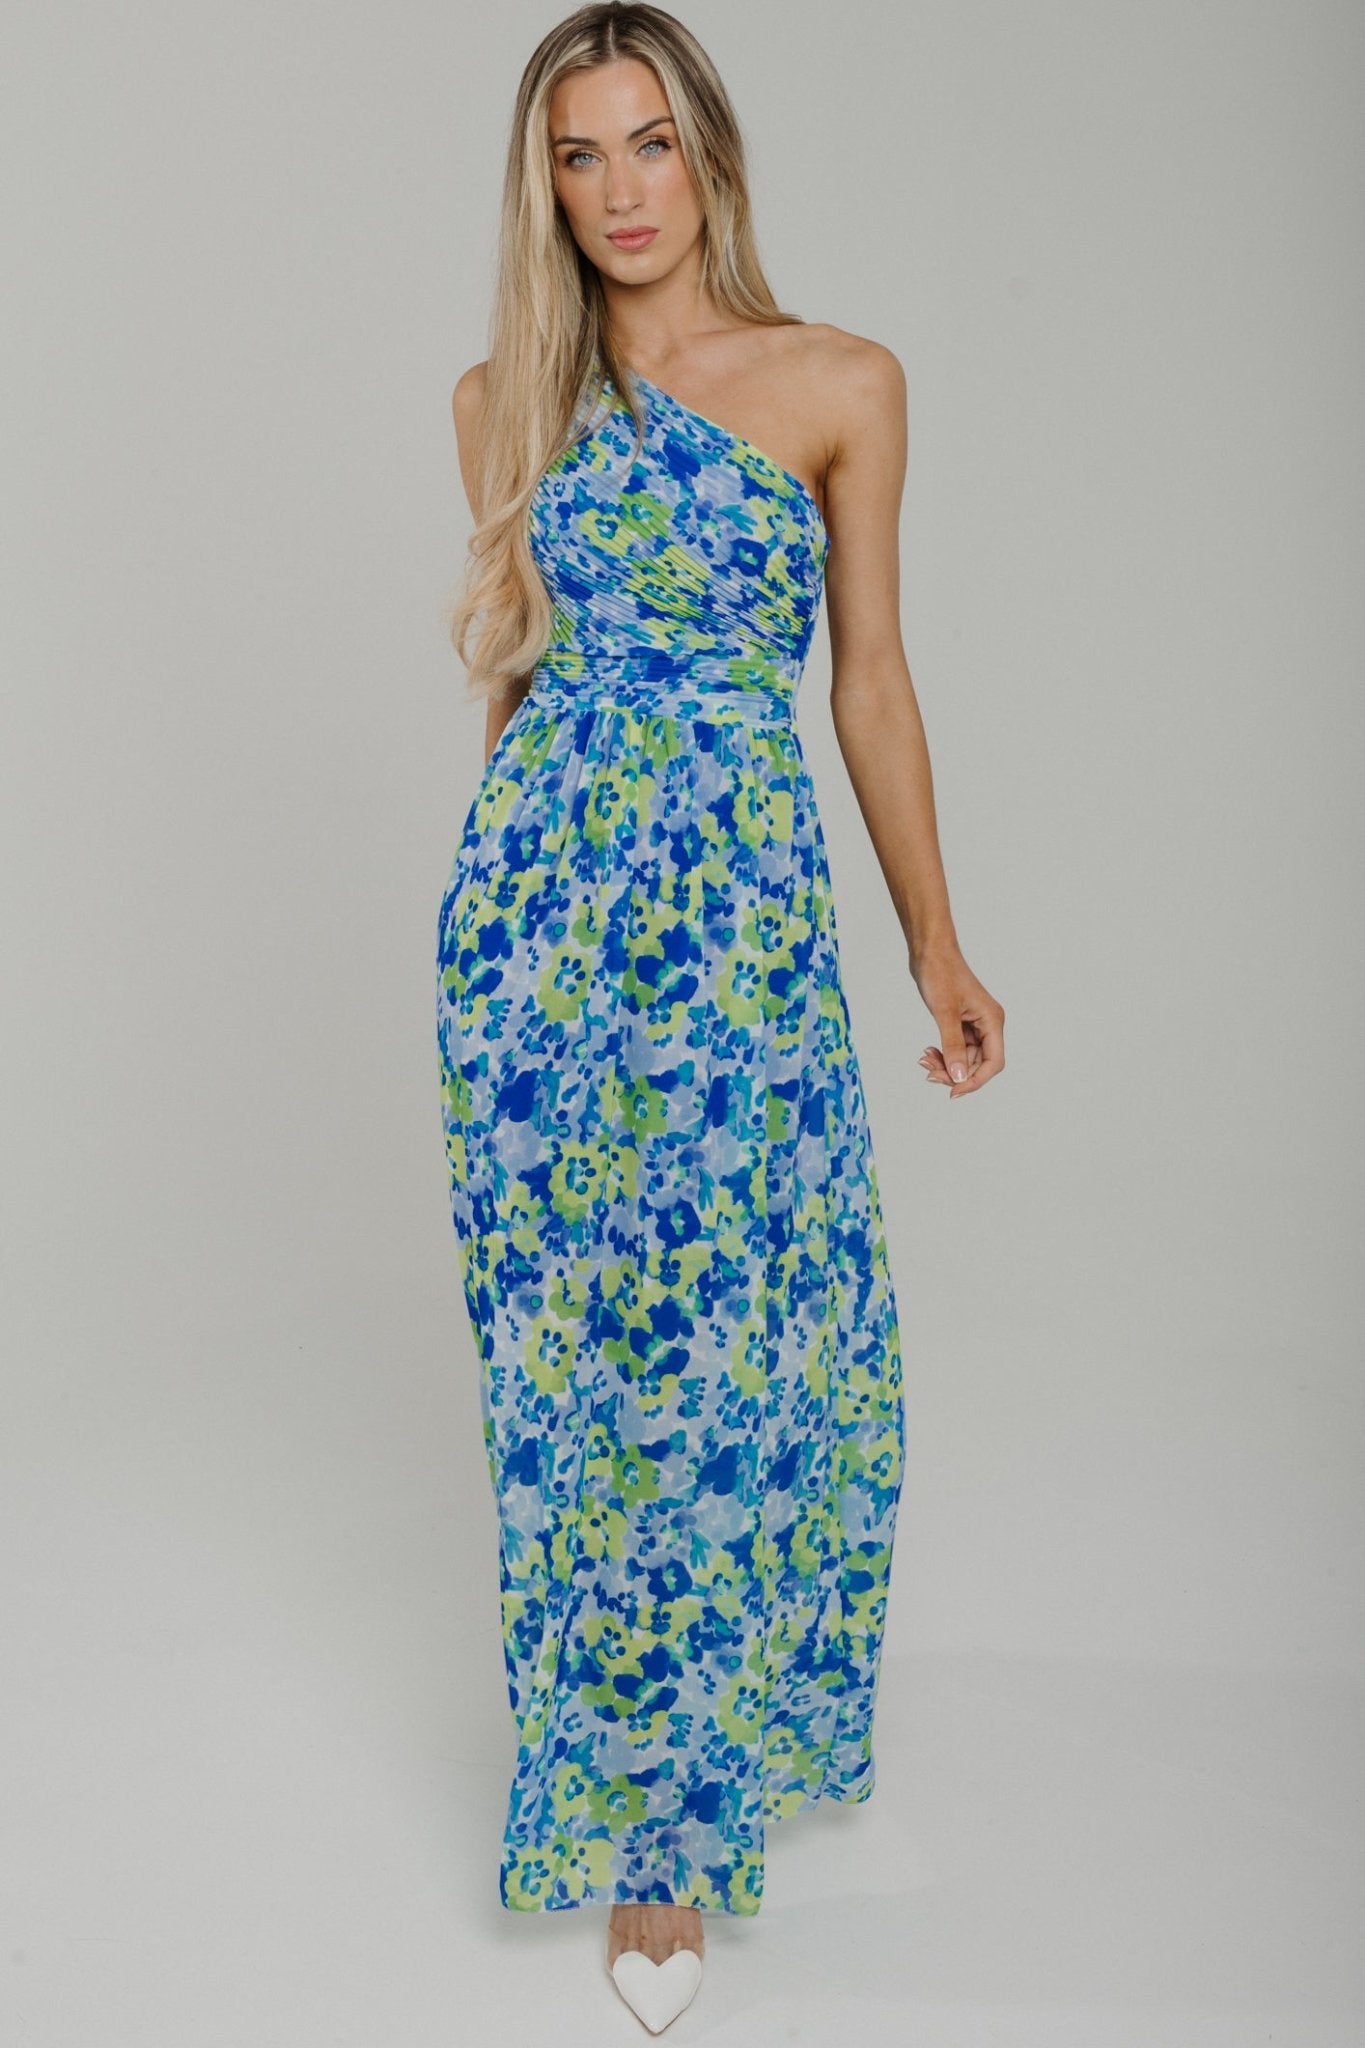 Indie One Shoulder Maxi Dress In Blue Floral - The Walk in Wardrobe